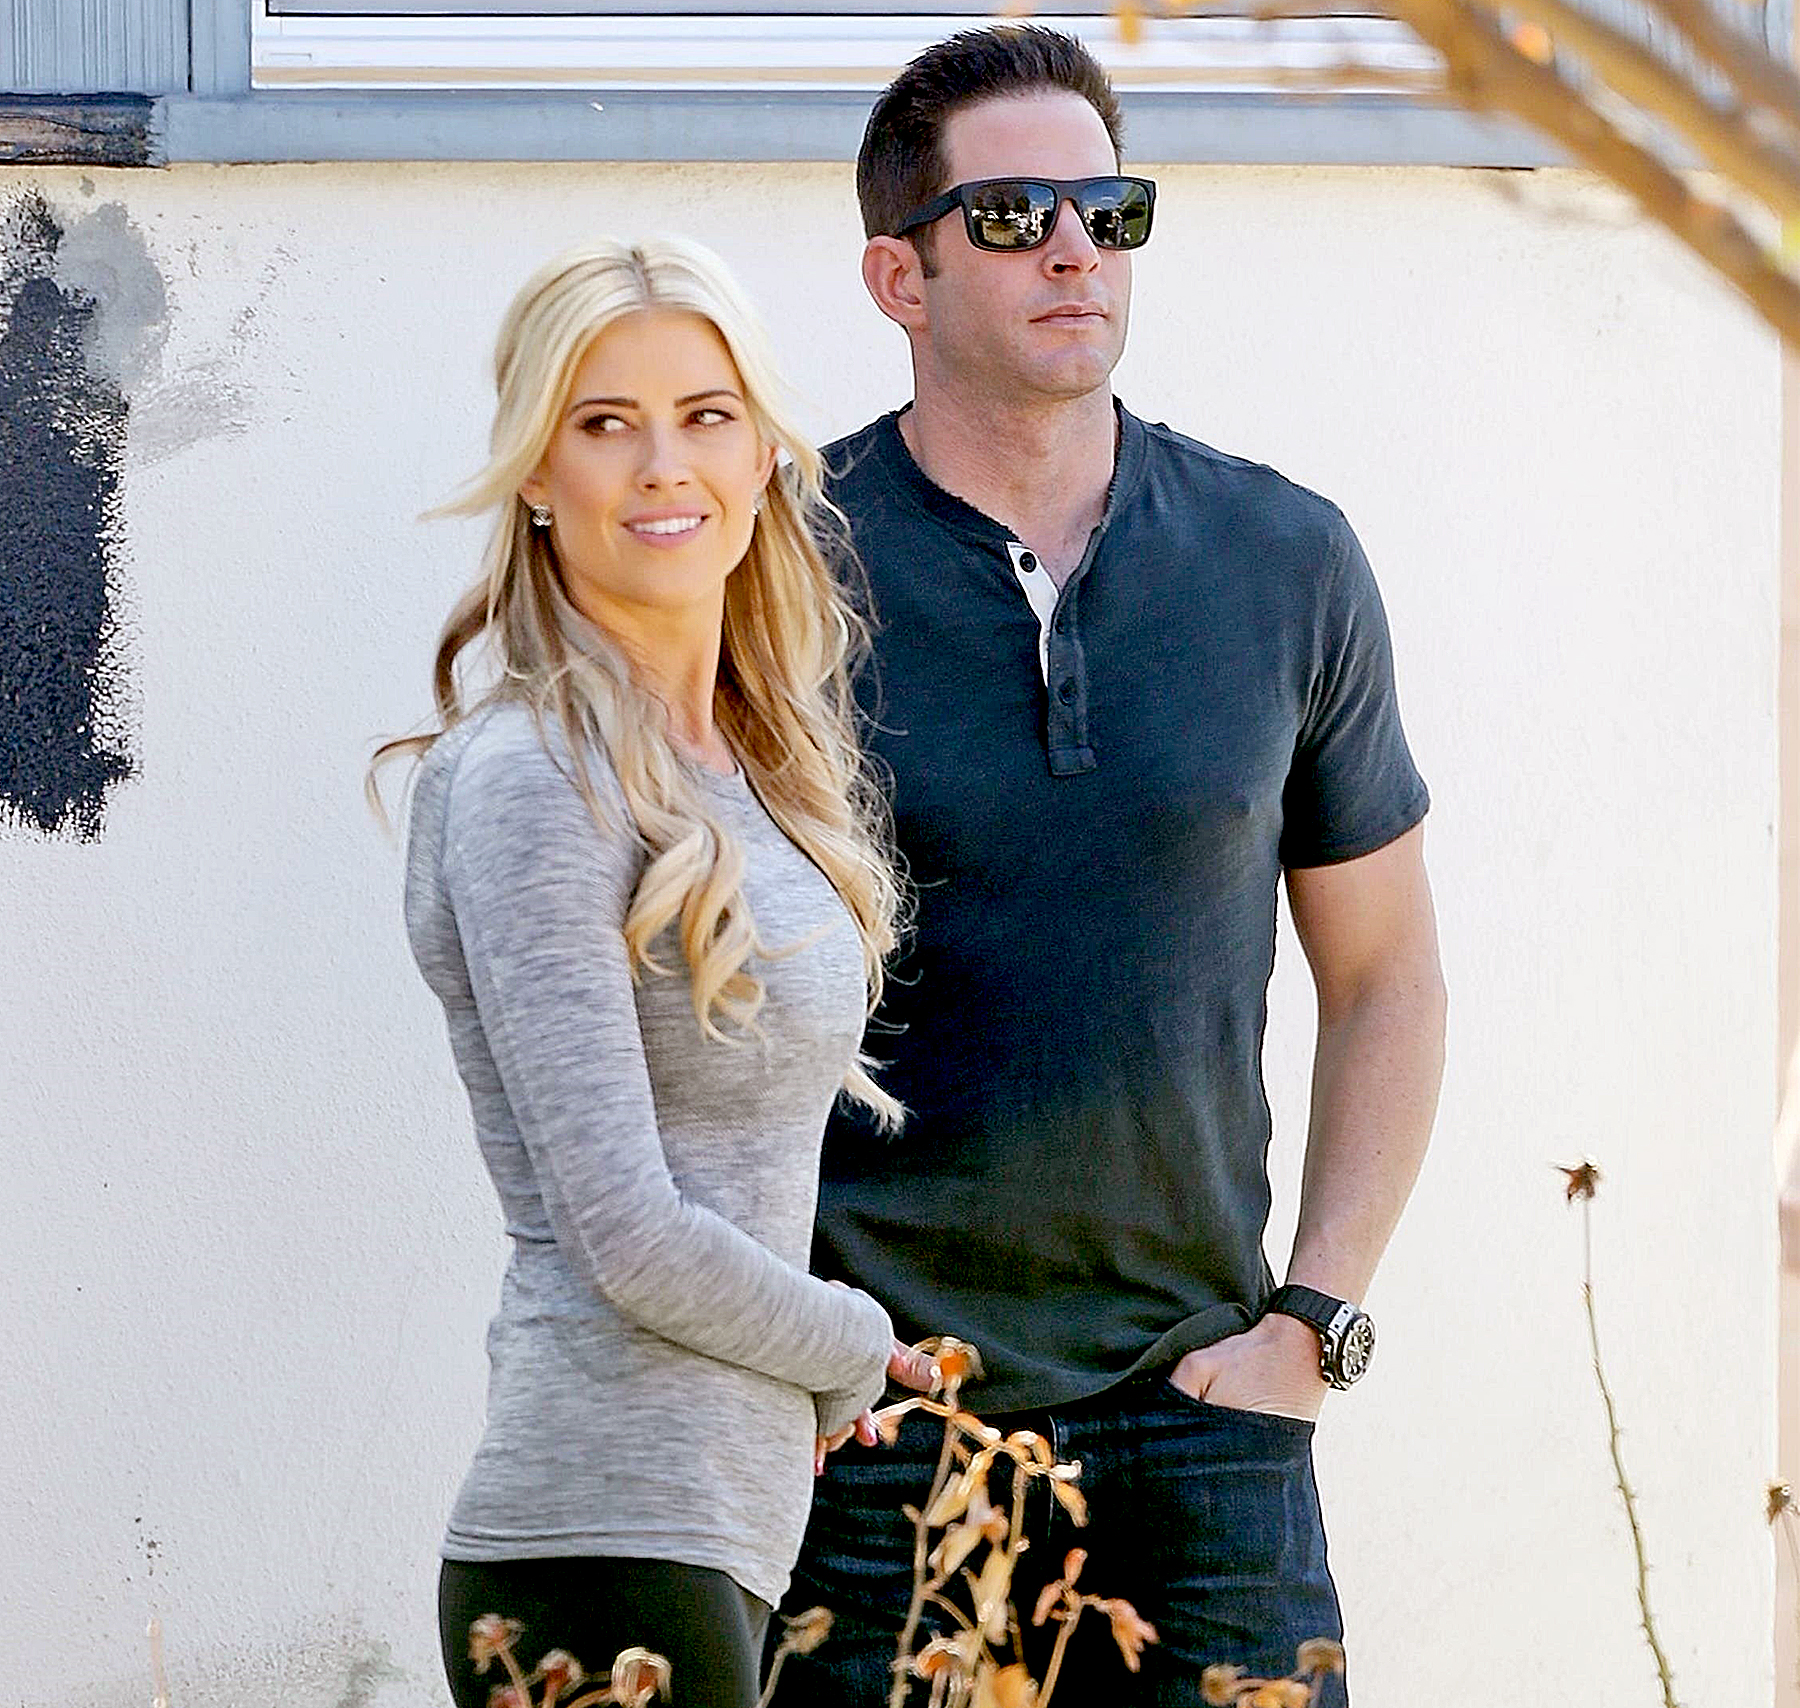 Tarek El Moussa Makes Out with Christina Look-alike on Yacht